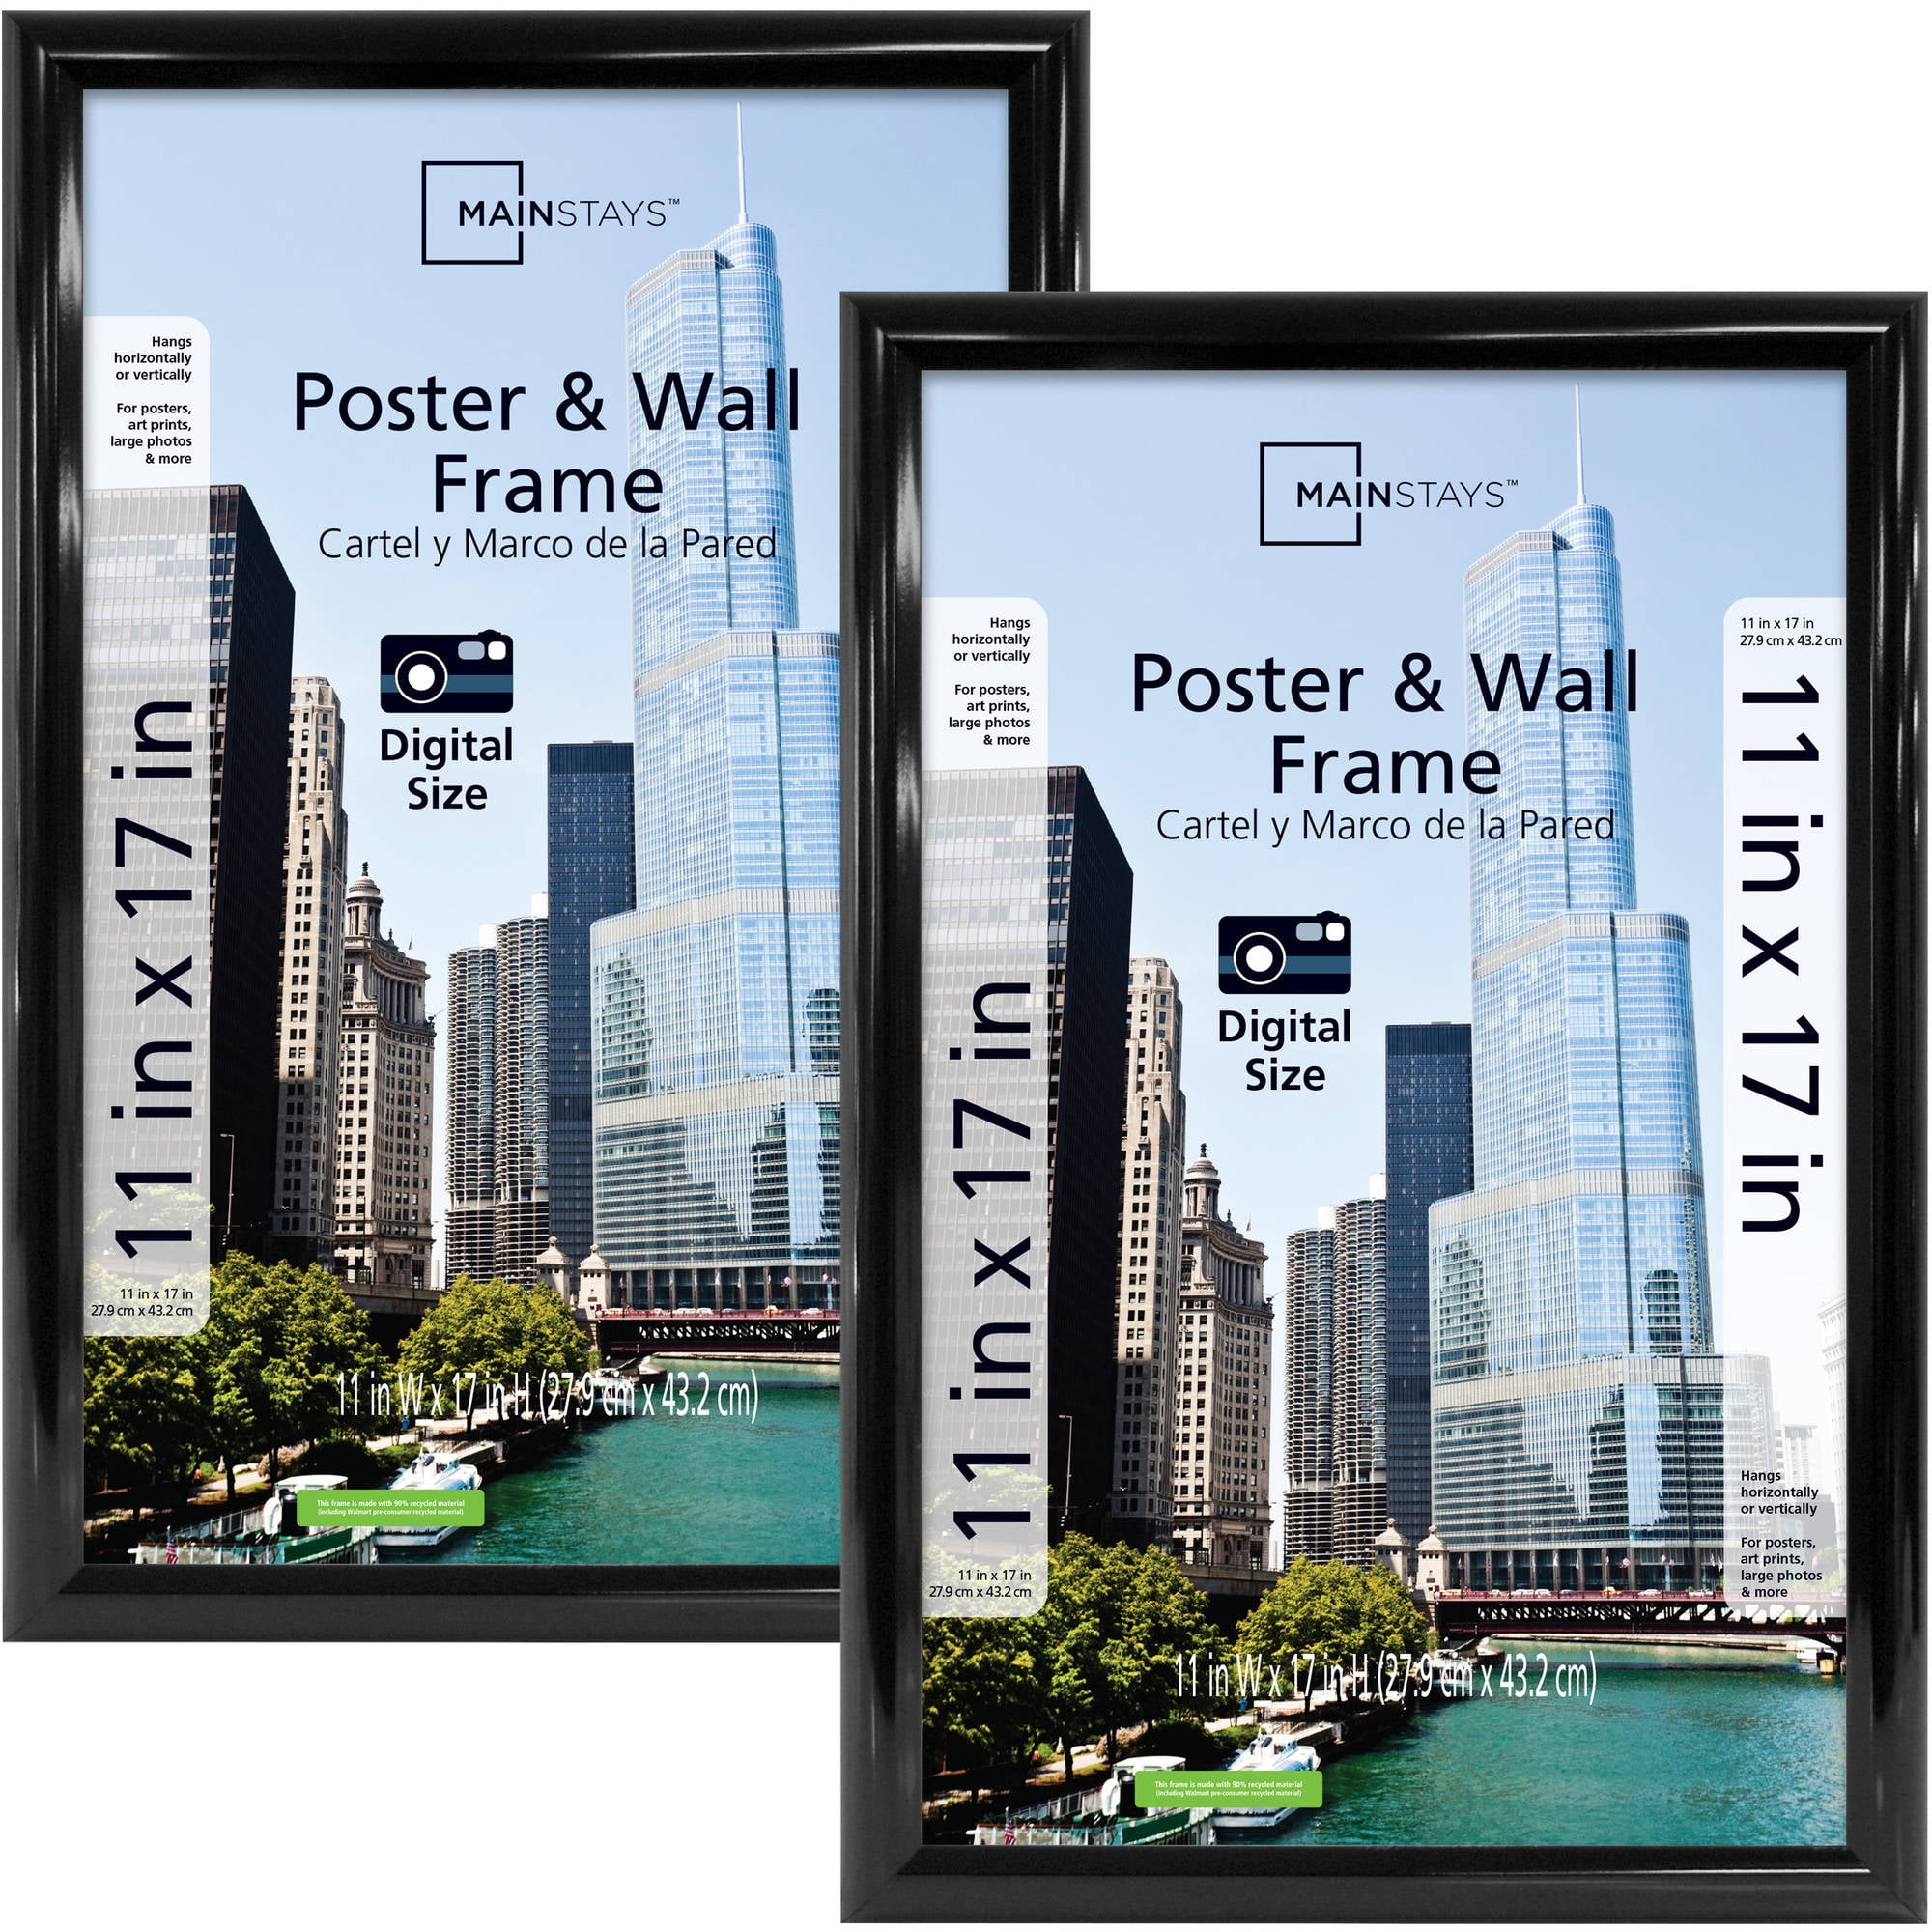 11"x17" Format Black Wall Picture Photo Poster Hanging Frame Home Decor Set Of 3 